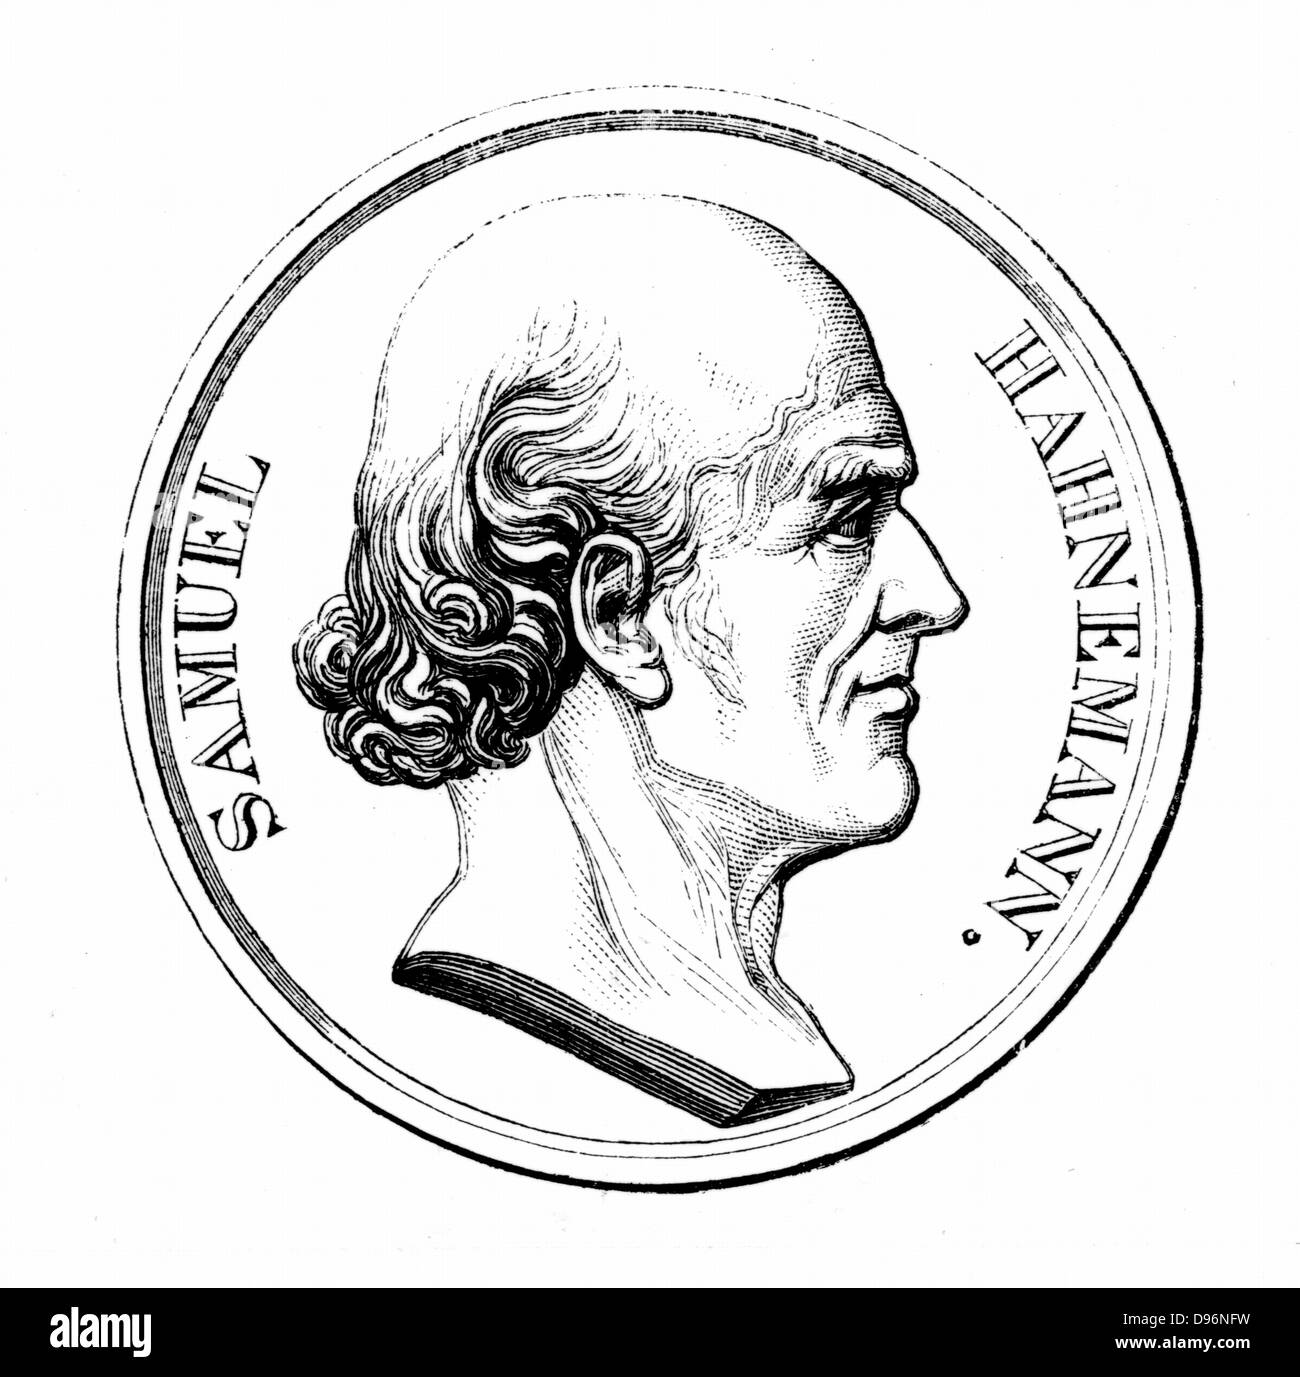 (Christian Friedrich) Samuel Hahnemann (1755-1843), German physician. Founded Homeopathy c1798.  Engraving after a commemorative medal. Stock Photo